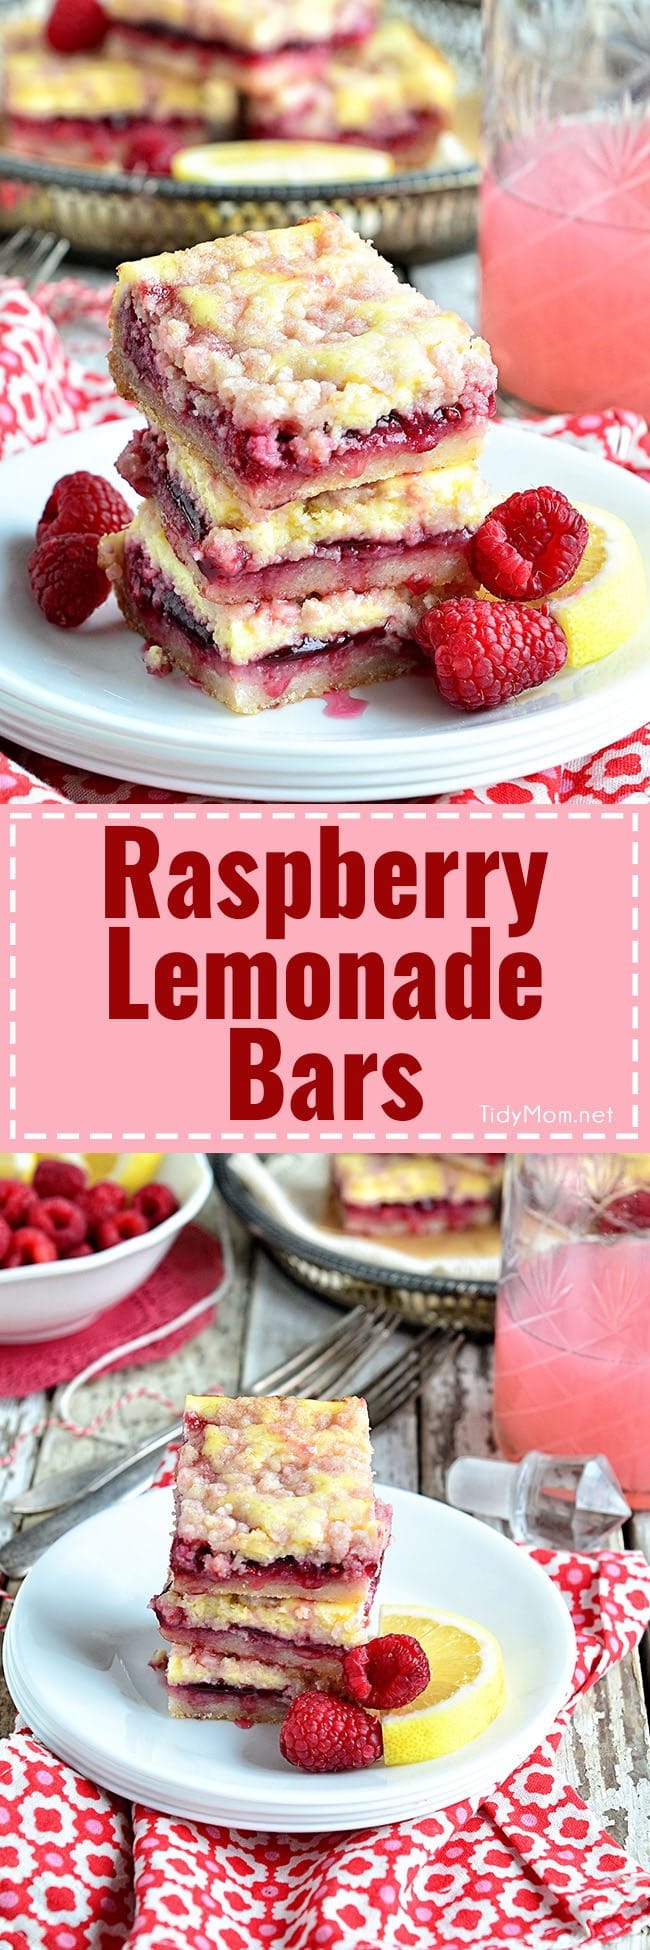 Raspberry Lemonade Bars are bright, cheery, packed with raspberries and tangy lemonade to help beat the winter blues, and the best part? There’s a little cheesecake tucked in too. Raspberry Lemonade Bars with streusel topping recipe at TidyMom.net